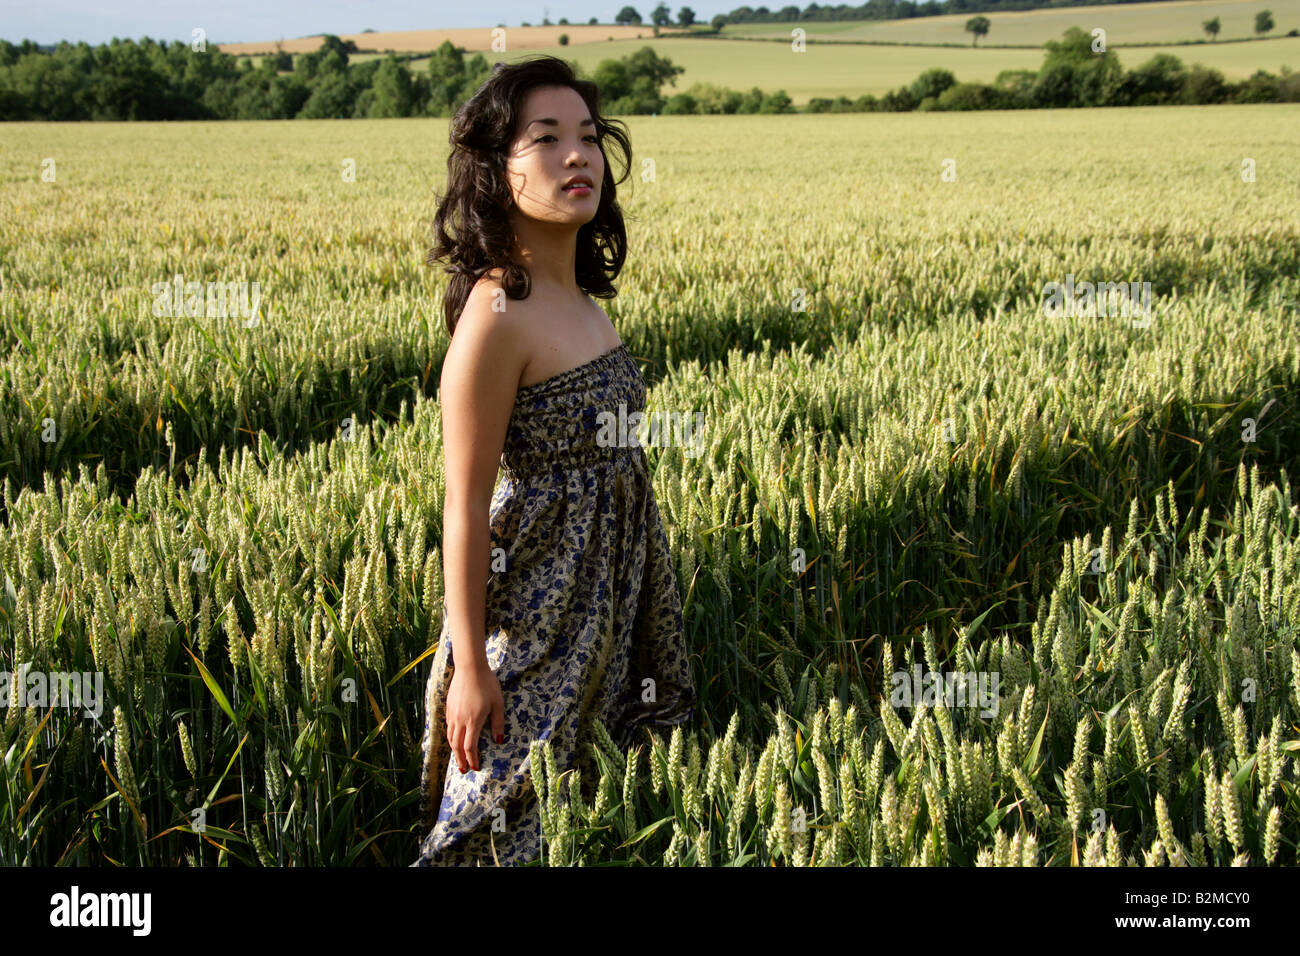 Chinese Girl in a Corn Field Stock Photo